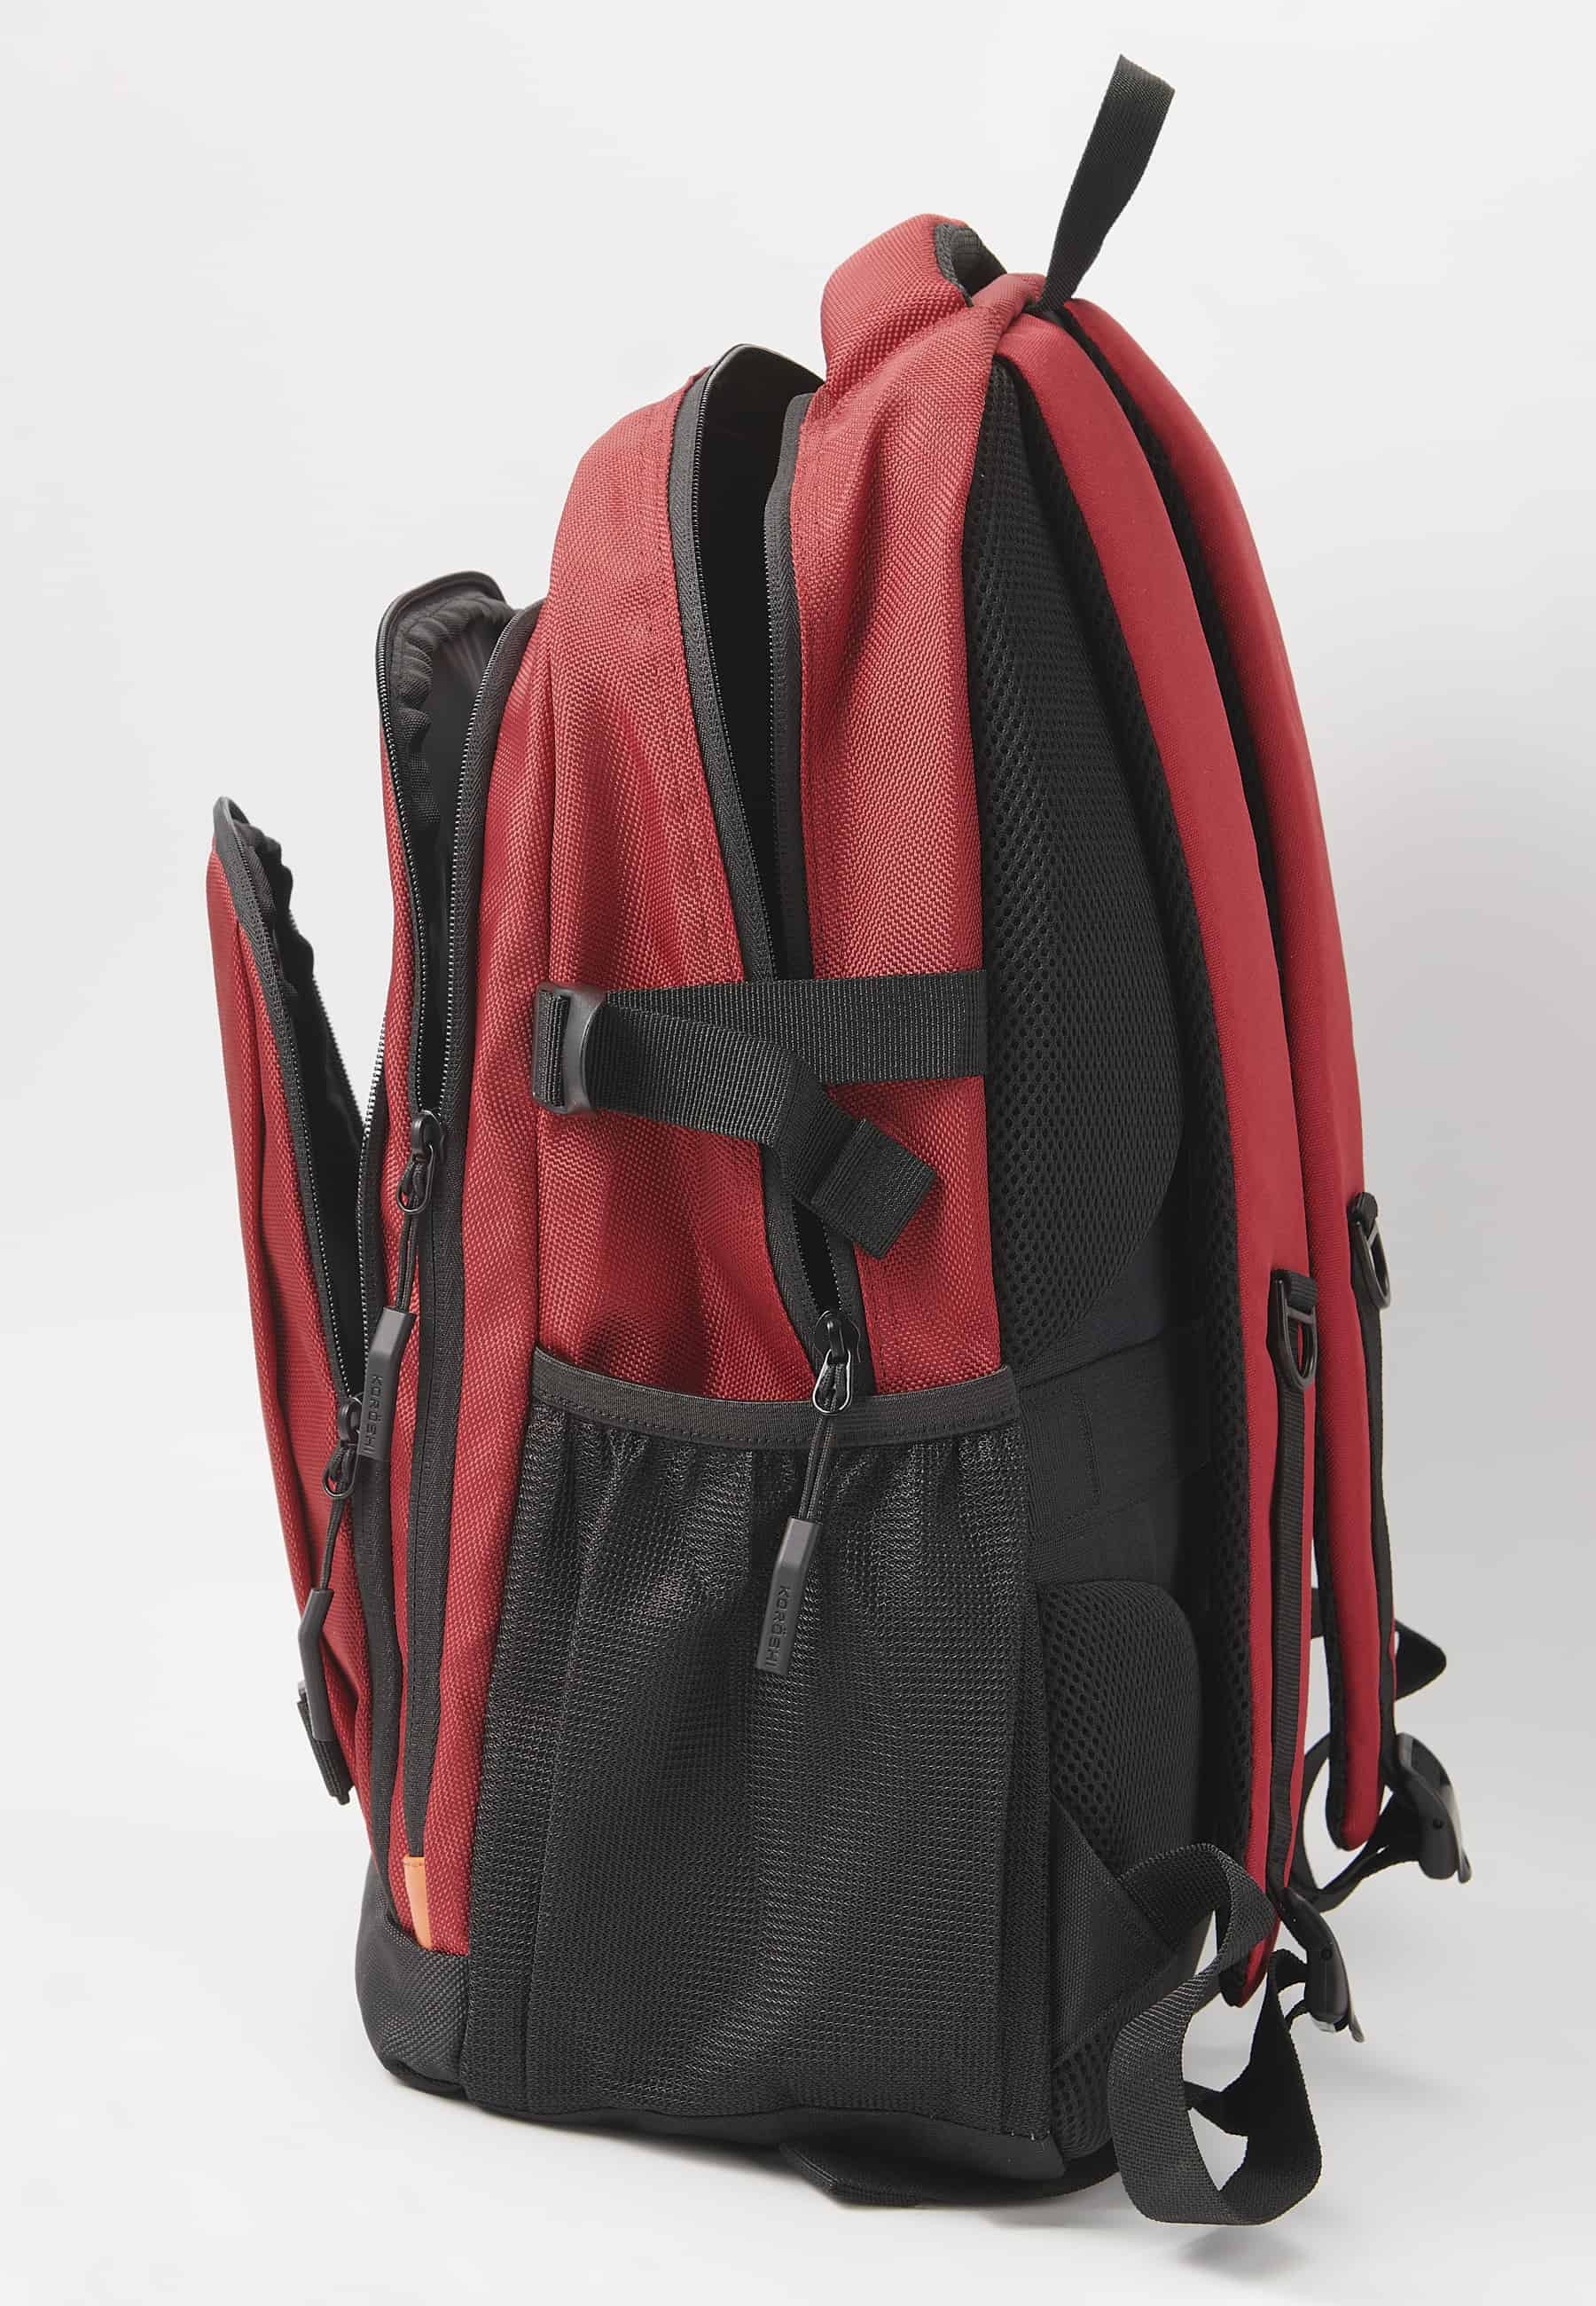 Koröshi backpack with three zippered compartments, one for laptop, with red interior pockets